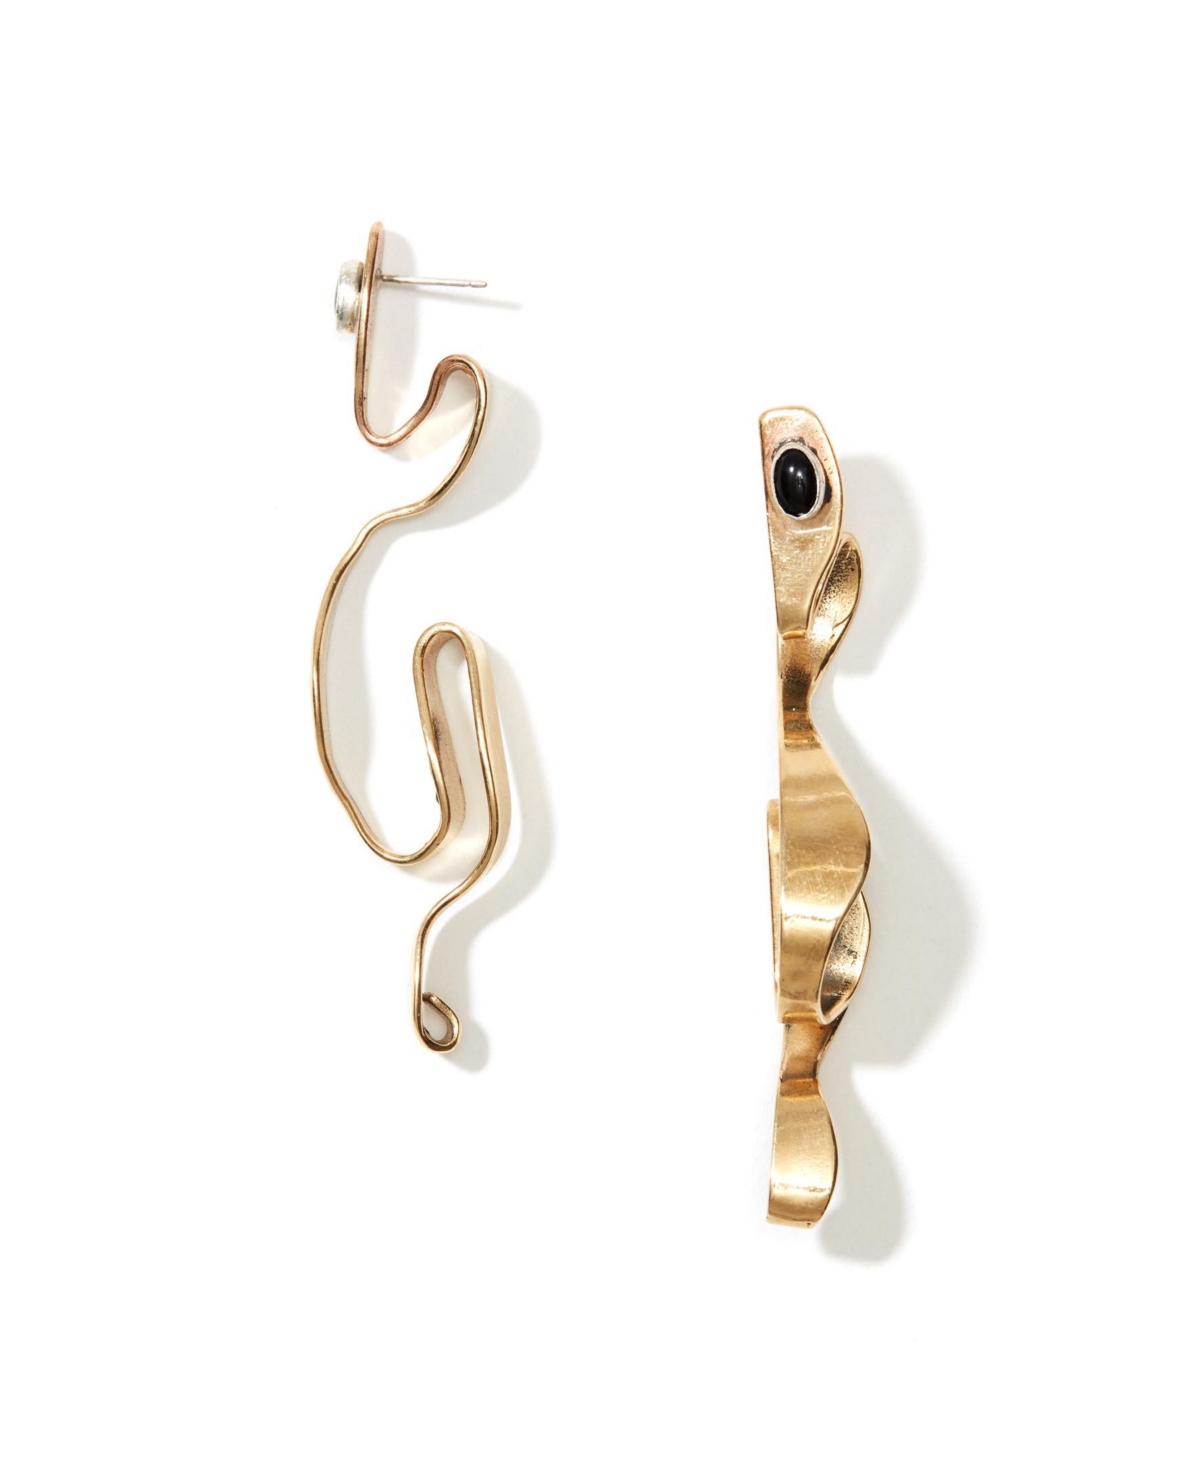 Nectar Nectar New York Flowing Agate Earrings In Gold Plated